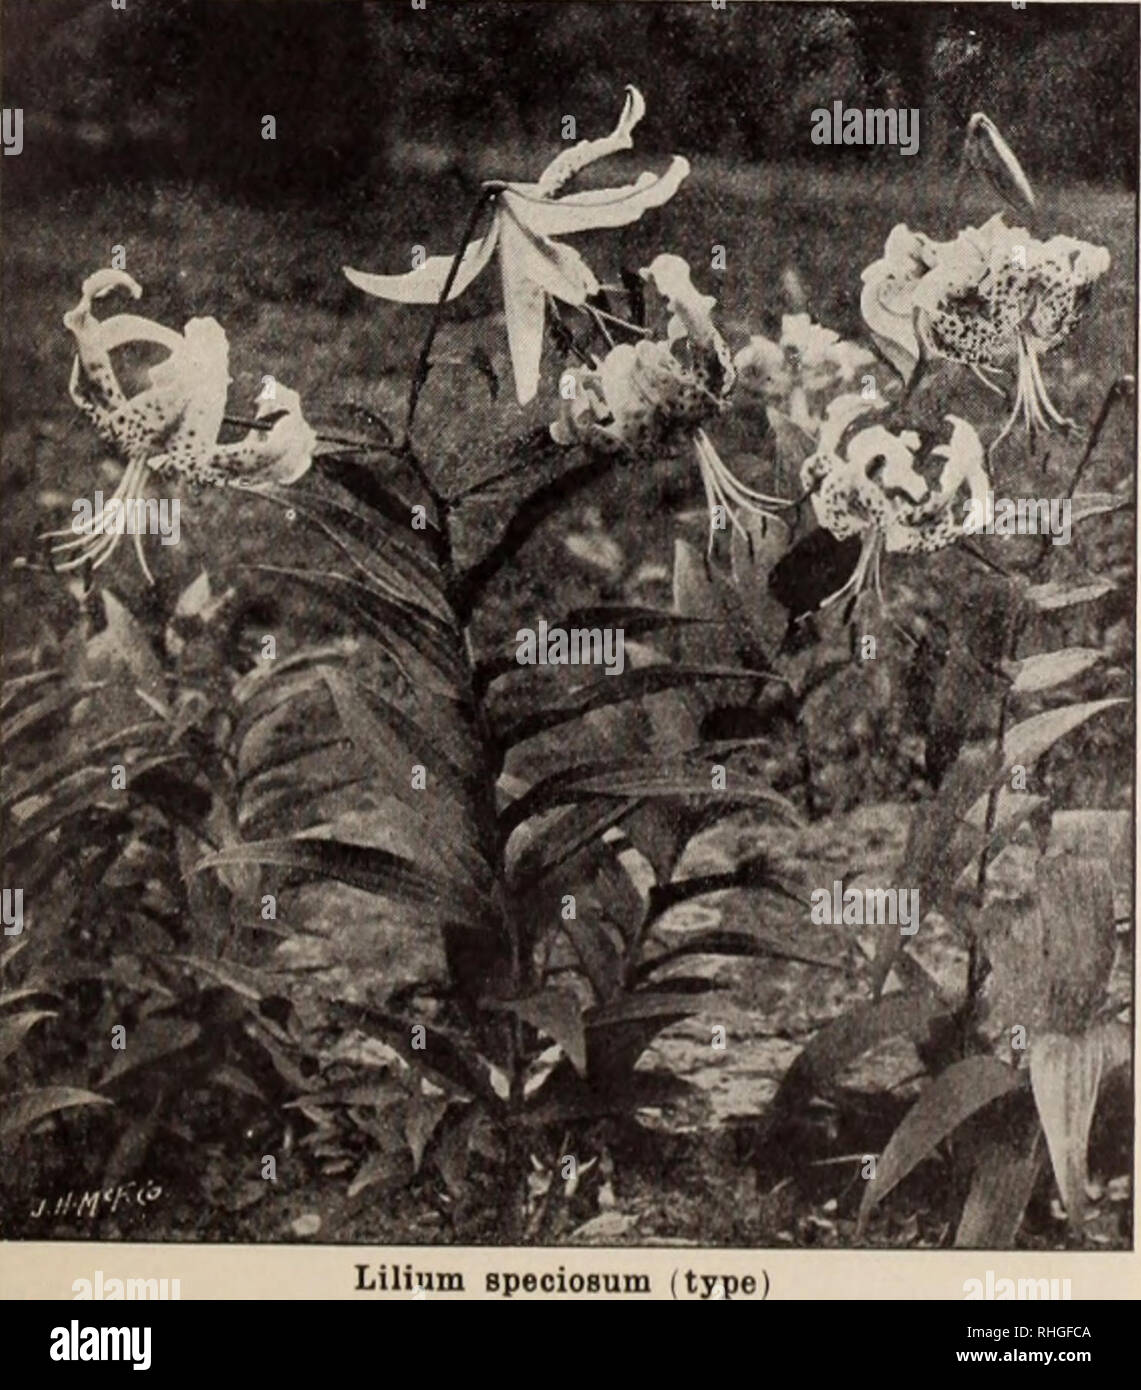 . Boddington's quality bulbs, seeds and plants / Arthur T. Boddington.. Nursery Catalogue. Lilium auratum (type). Doz. $4 00 $30 00 3 50 25 00 60 6 00 45 00 Lilium speoiosum (type LILIUM AURATUM PLATYPHYLLUM. Each A very strong and vigorous type of L. auratum. Flowers of immet sesize, pure ivory white, with a deep golden band through each petal. Mammoth bulbs Jo 50 Large bulbs 40 LILIUM AURATUM RUBRUM VITTA- TUM, A unique variety; flowers 10 to 12 inches across, ivory white, with broad crimson stripe through center of each petal. Large bulbs LILIUM AURATUM VIRGINALE ALBUM. The White Lily of Ja Stock Photo